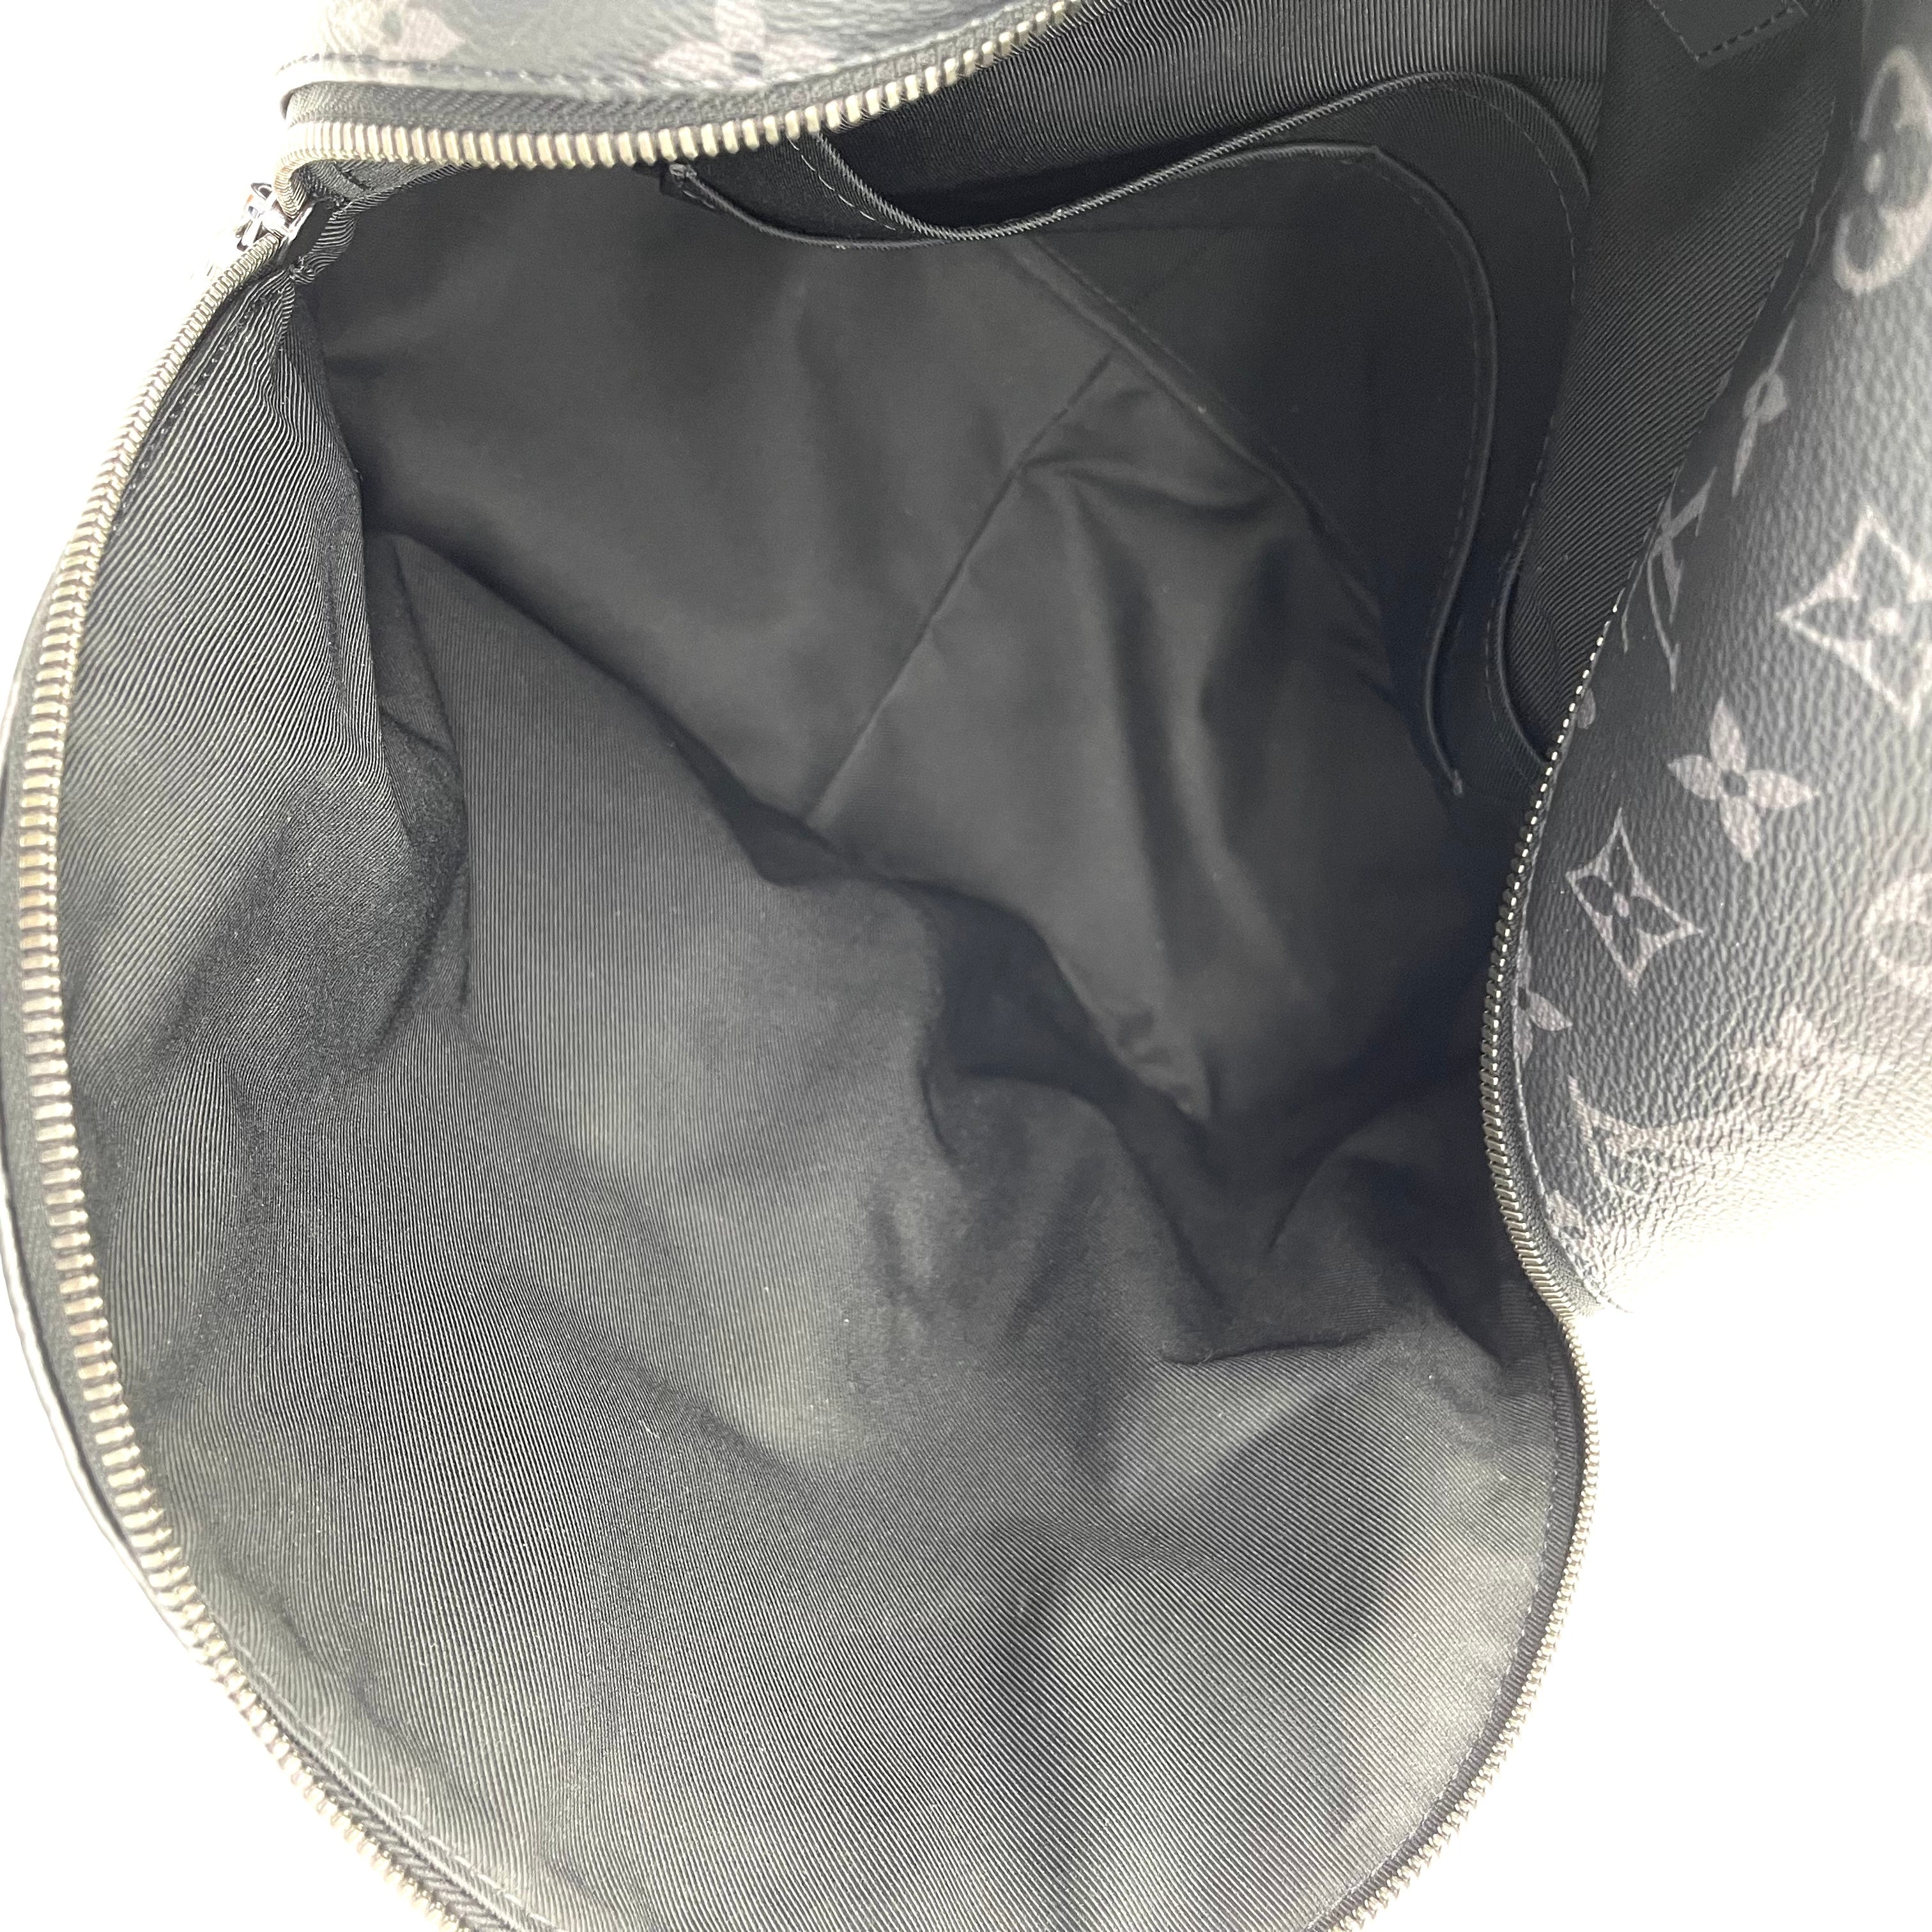 vuitton discovery backpack silver